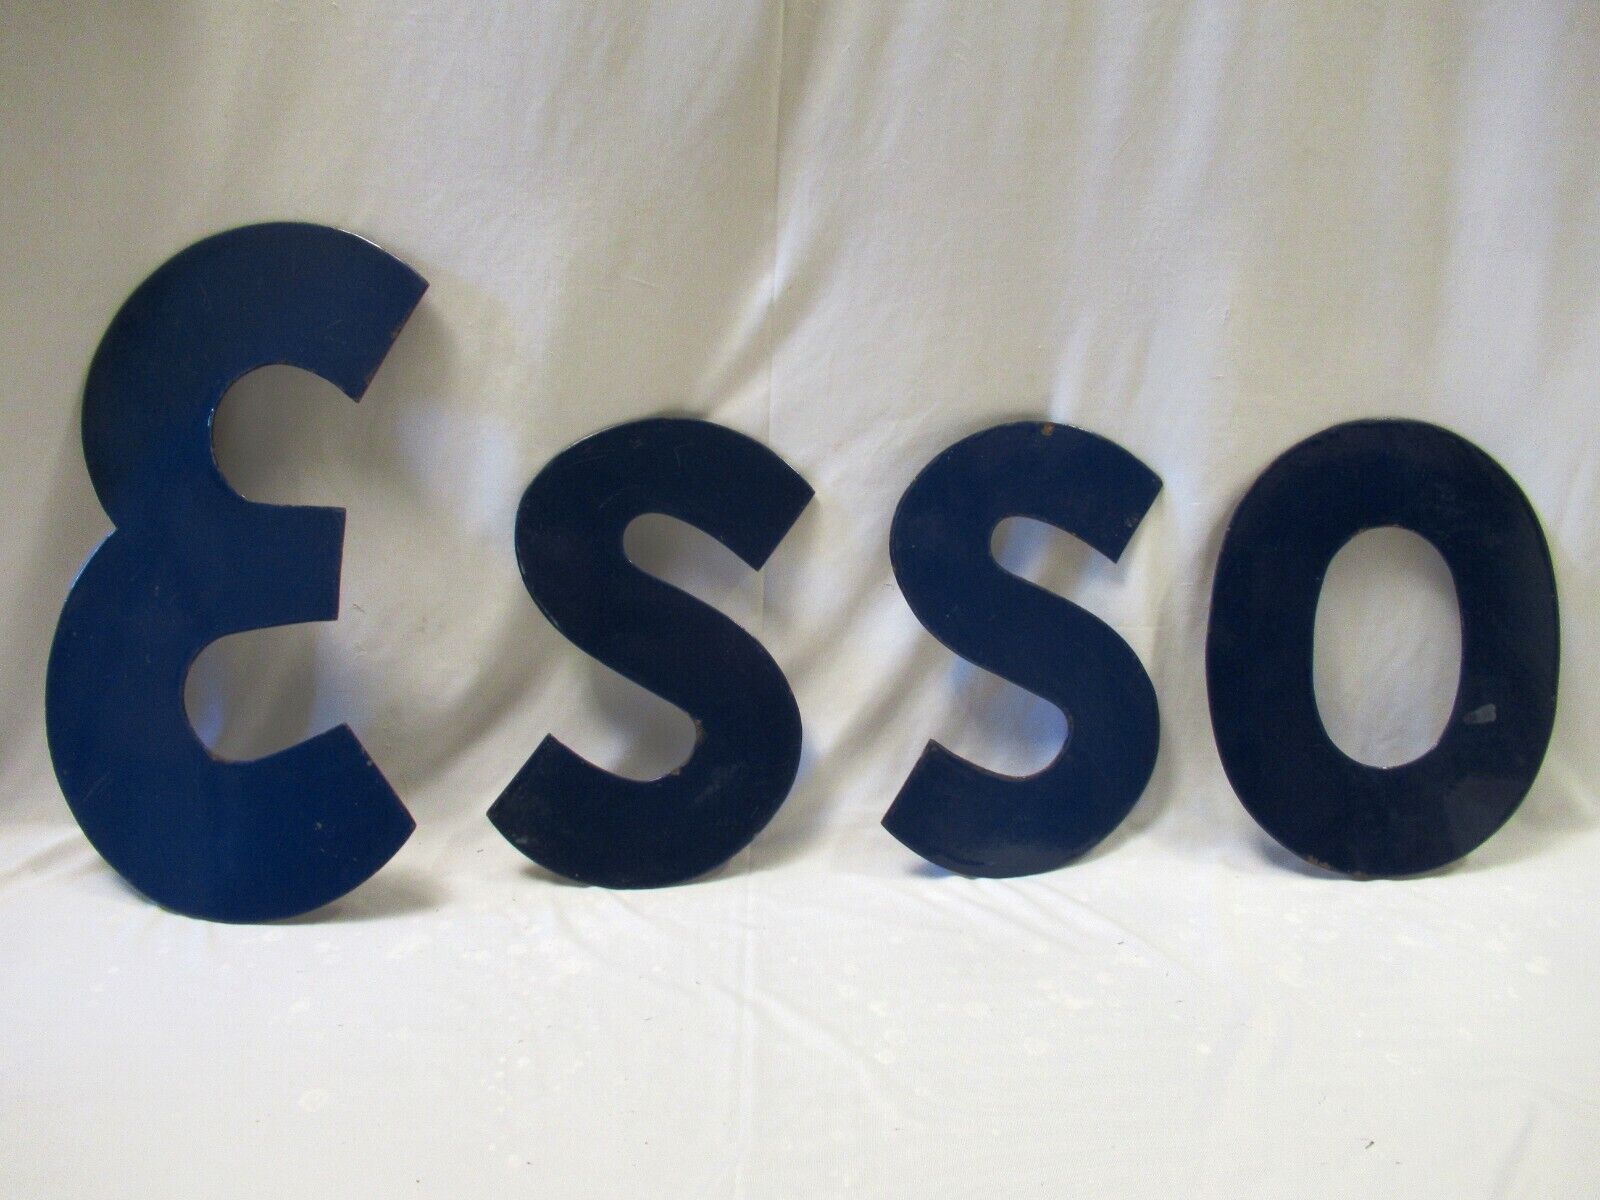 Esso Letters Gas Station Advertising Sign Porcelain Enamel Collectibles Rare \